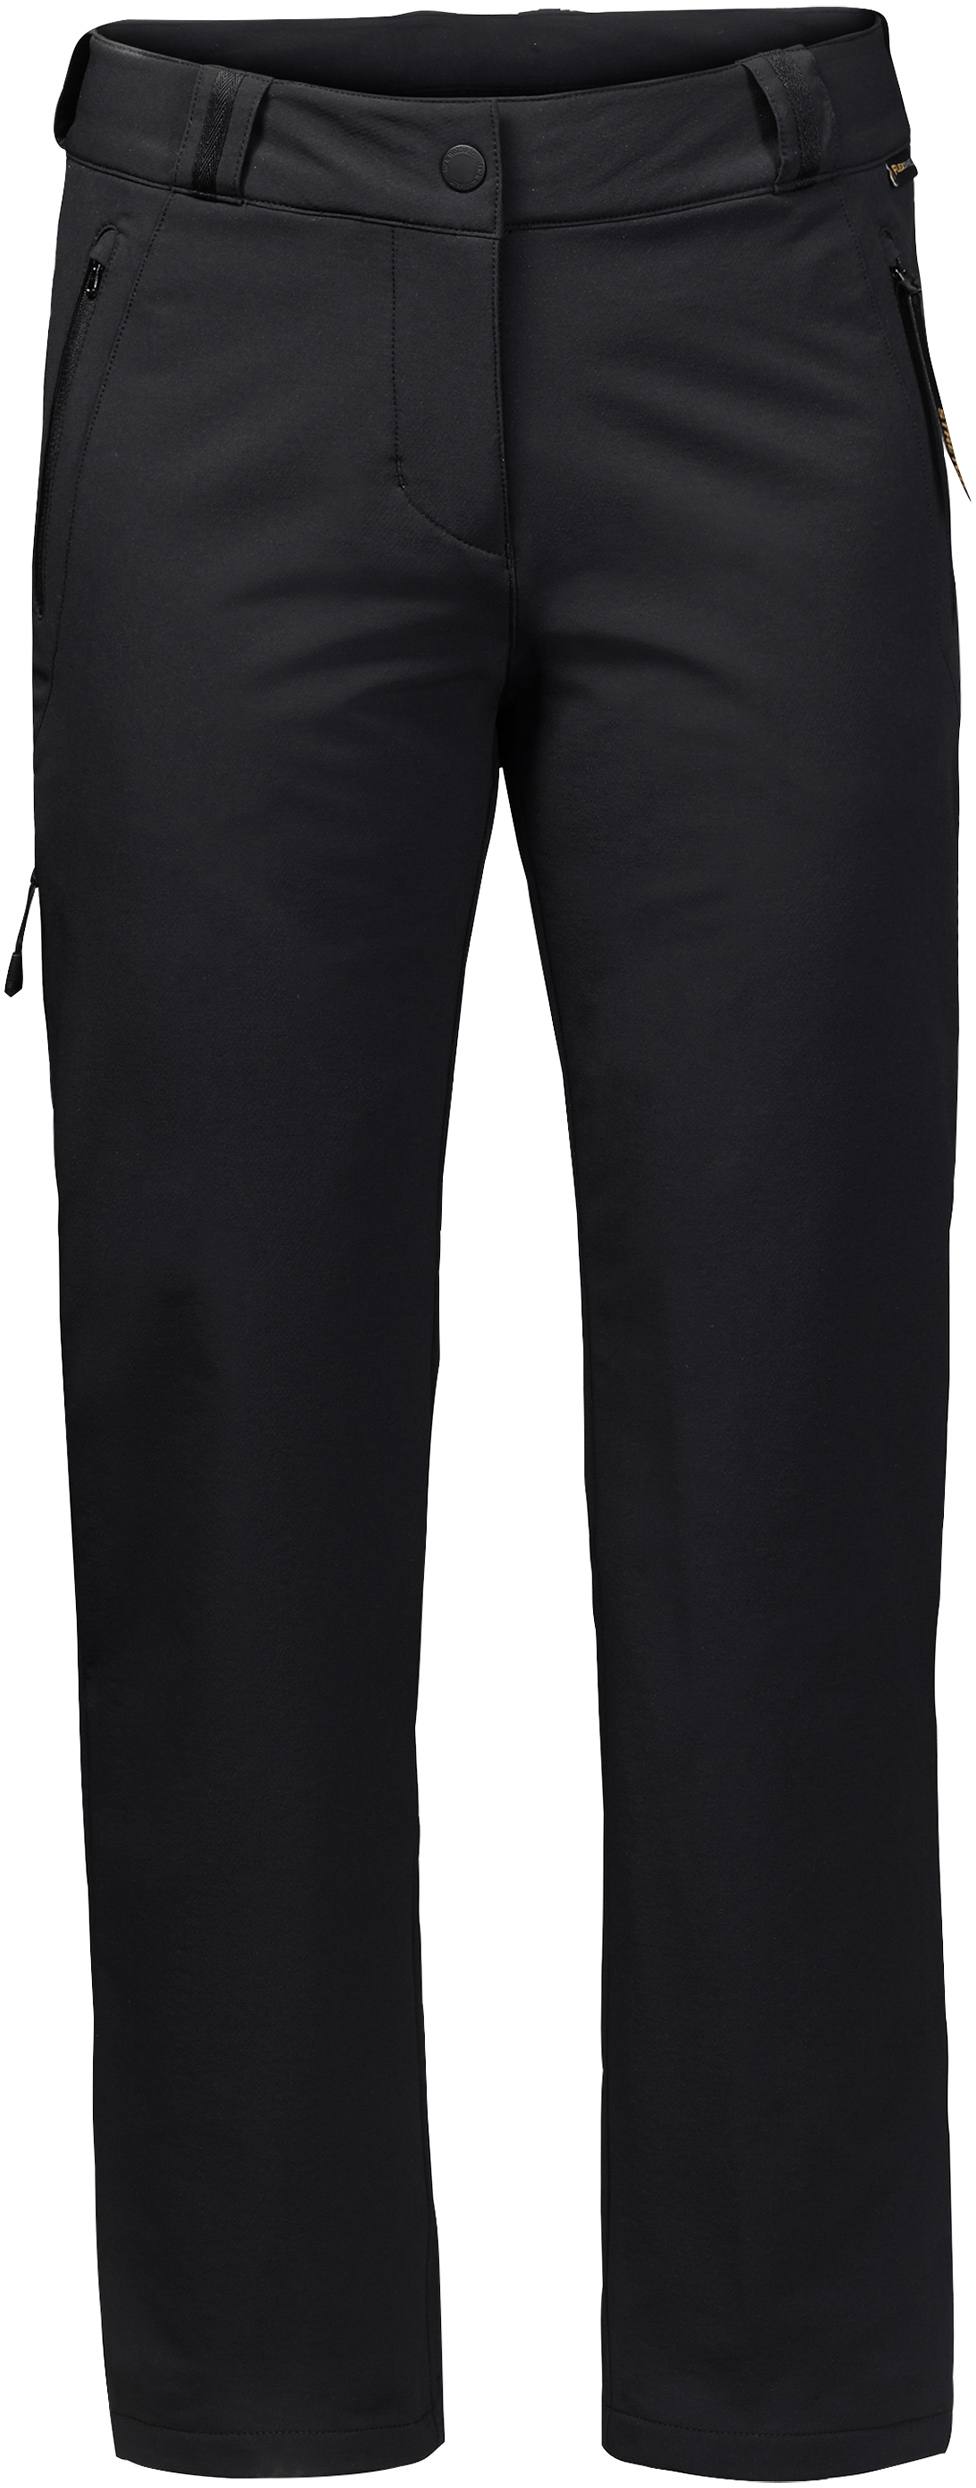 Activate Thermic Women’s Pants Musta 46